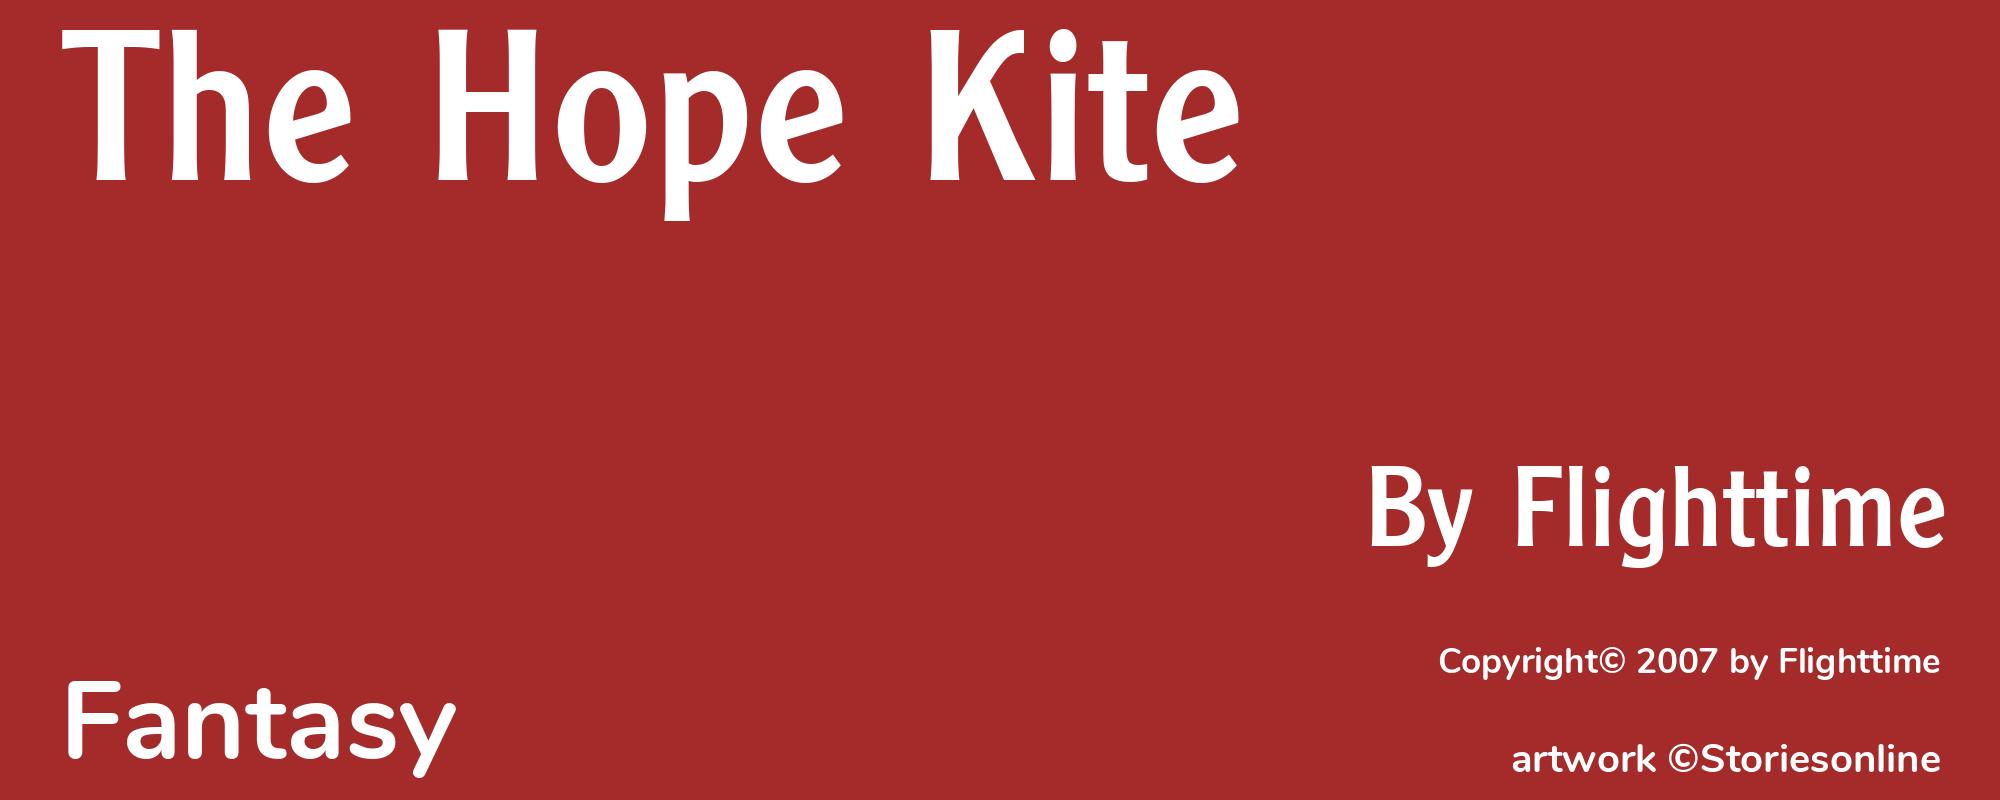 The Hope Kite - Cover